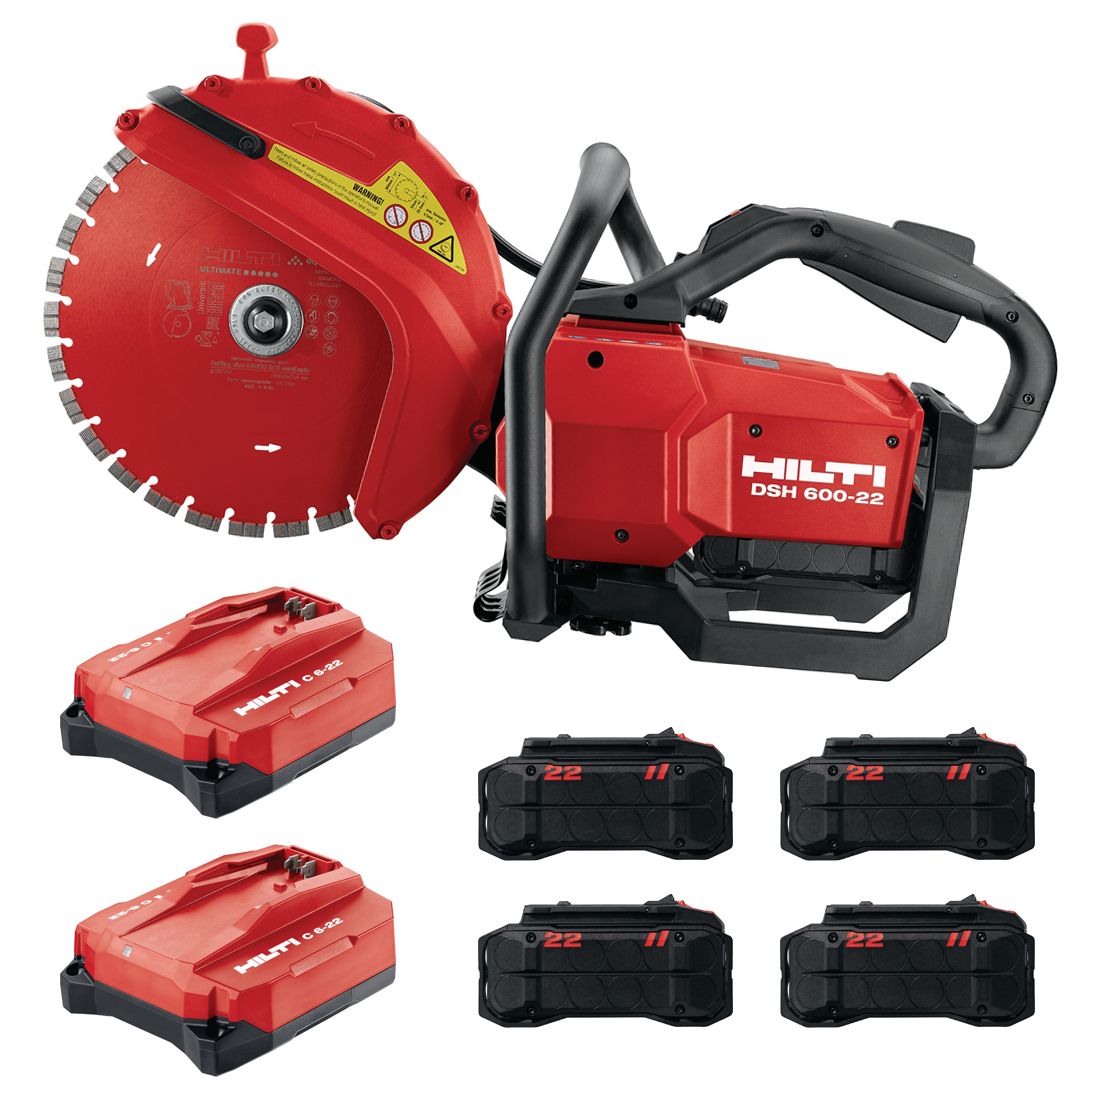 Hilti NURON Cordless Cut-off Saw, 4x 8Ah Batteries, 2x Chargers, Carrying Case